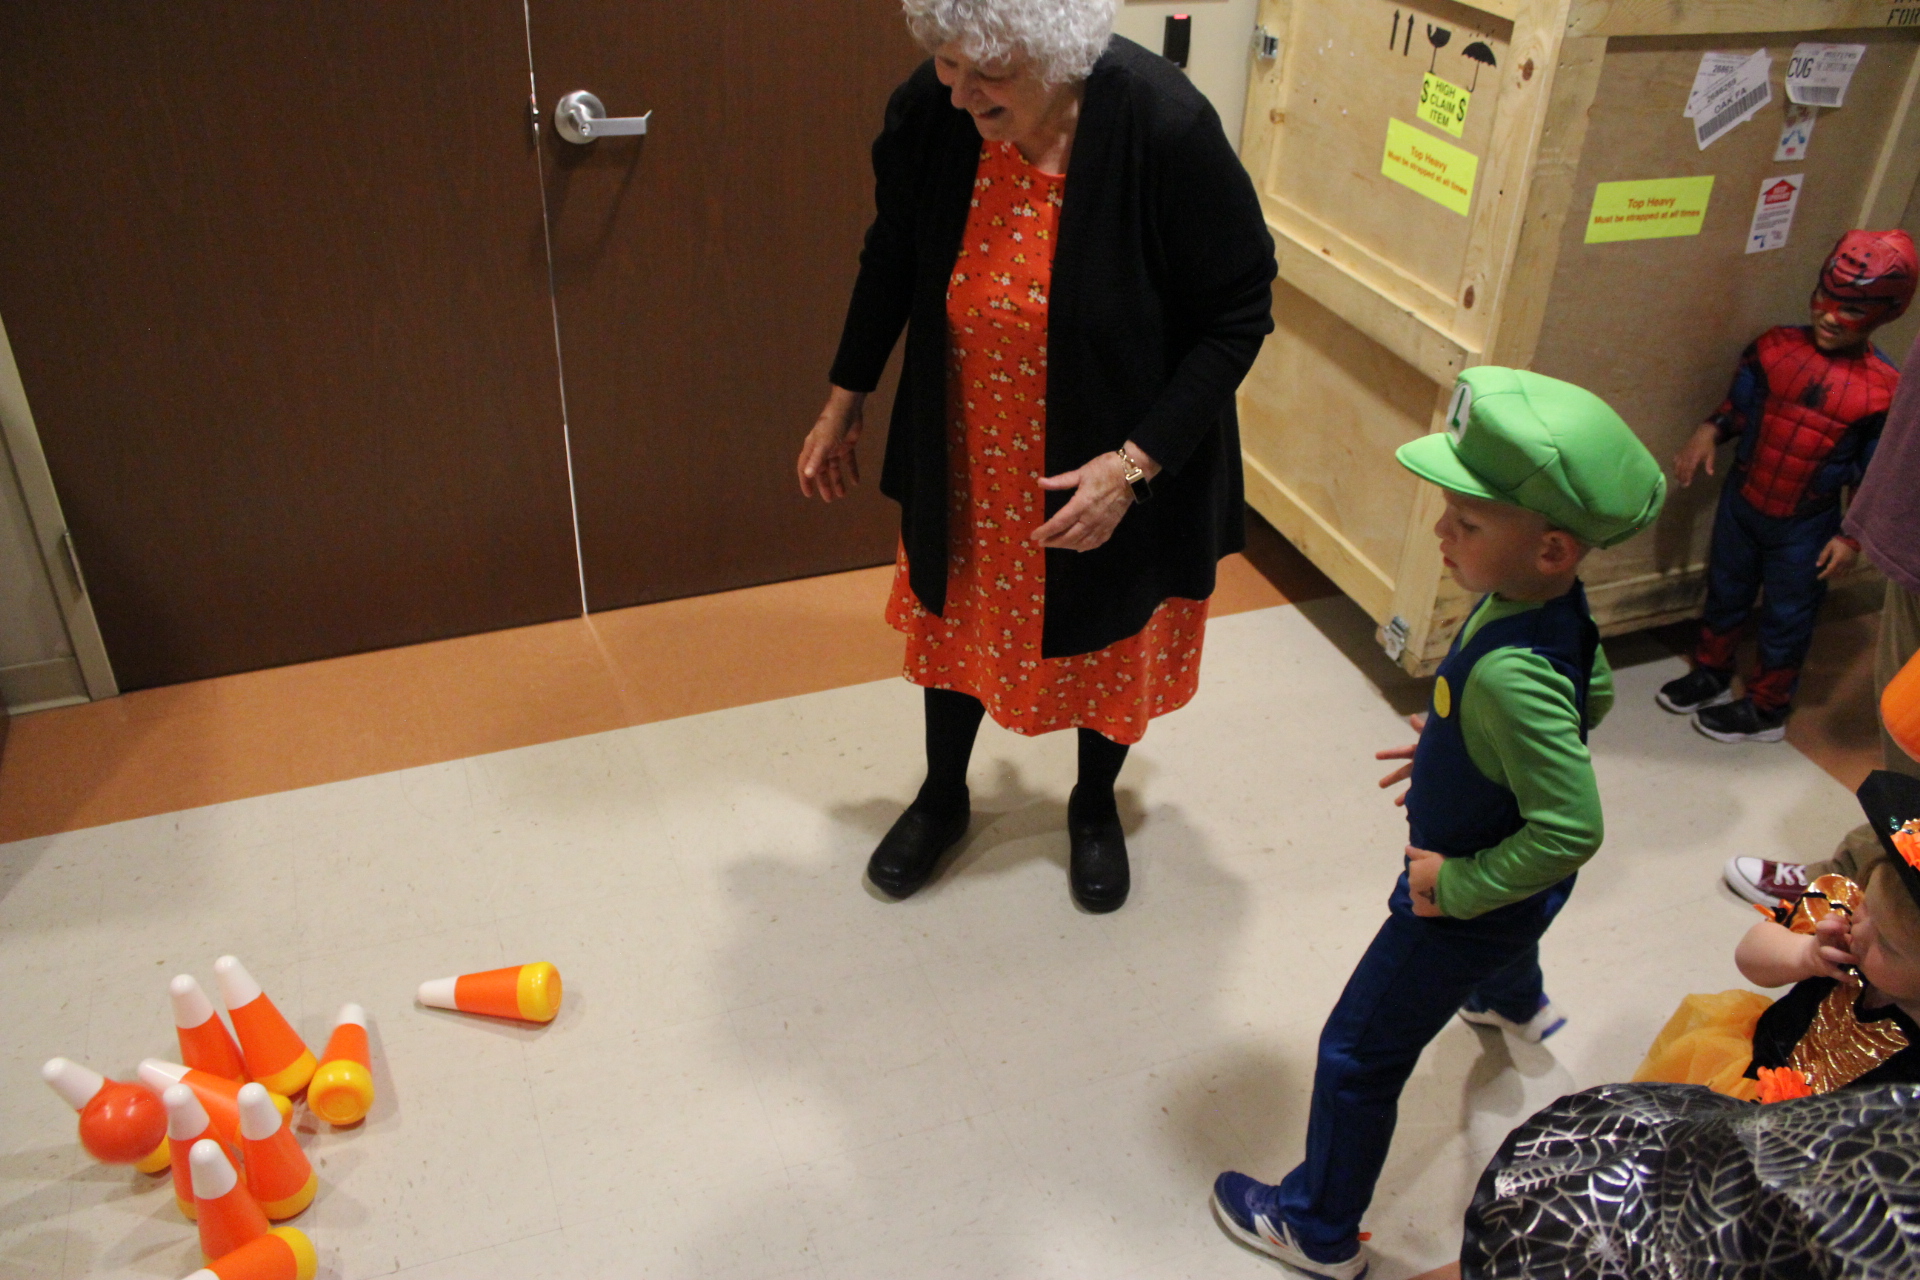 Friend of the Library Lois cheering while child dressed as Luigi plays candy-themed bowling game